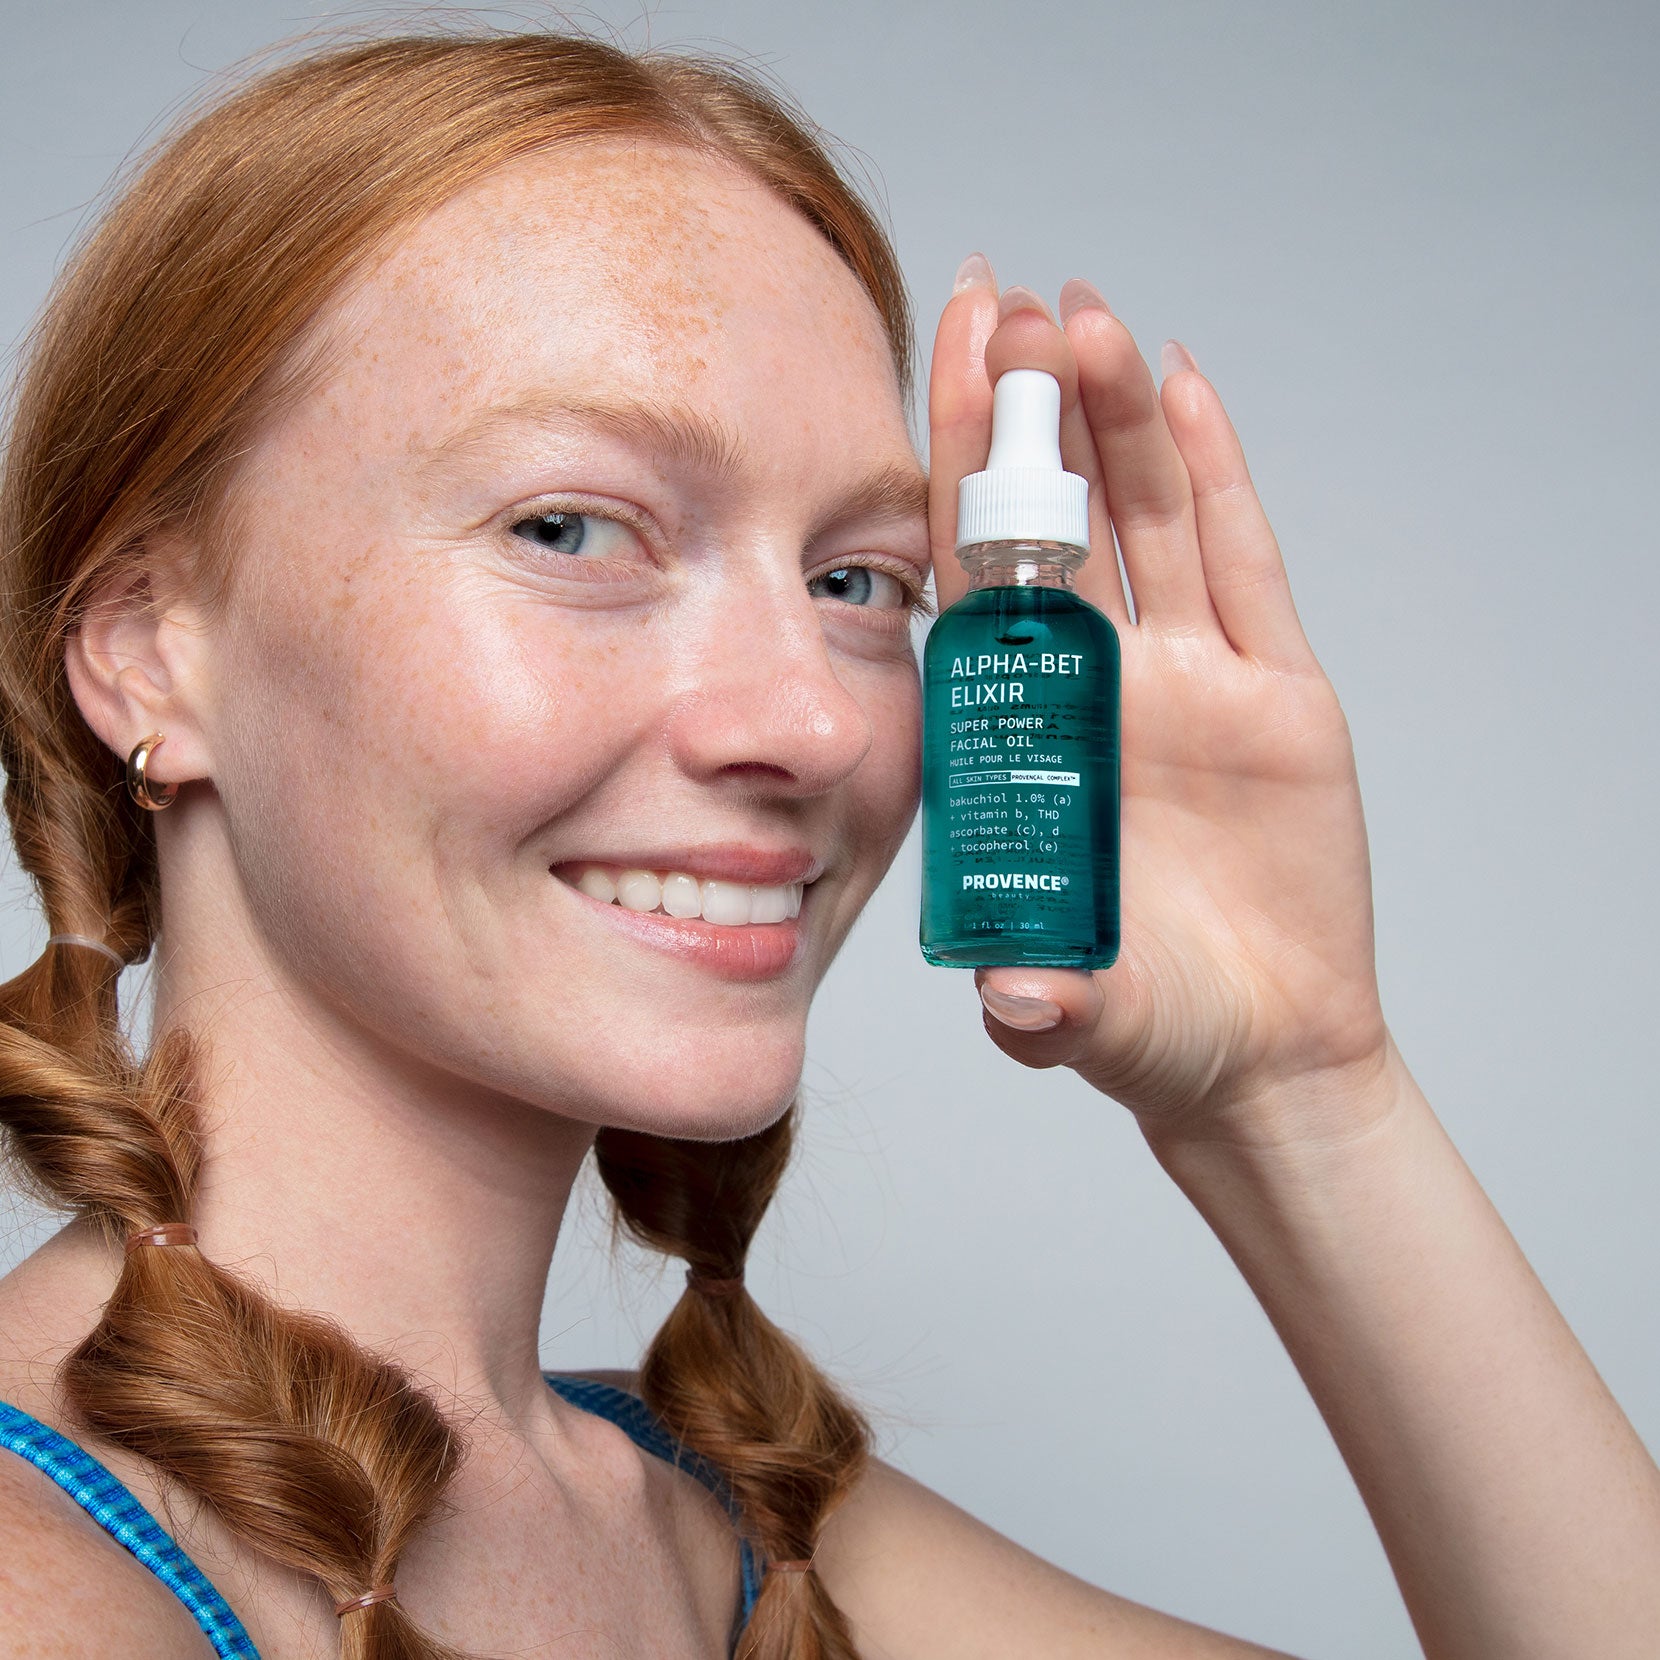 A model with glowing skin and red hair with bubble braids holding Alpha-Bet Elixir Super Power Facial Oil up by her face. Showcasing the bright turquoise gem color of the product